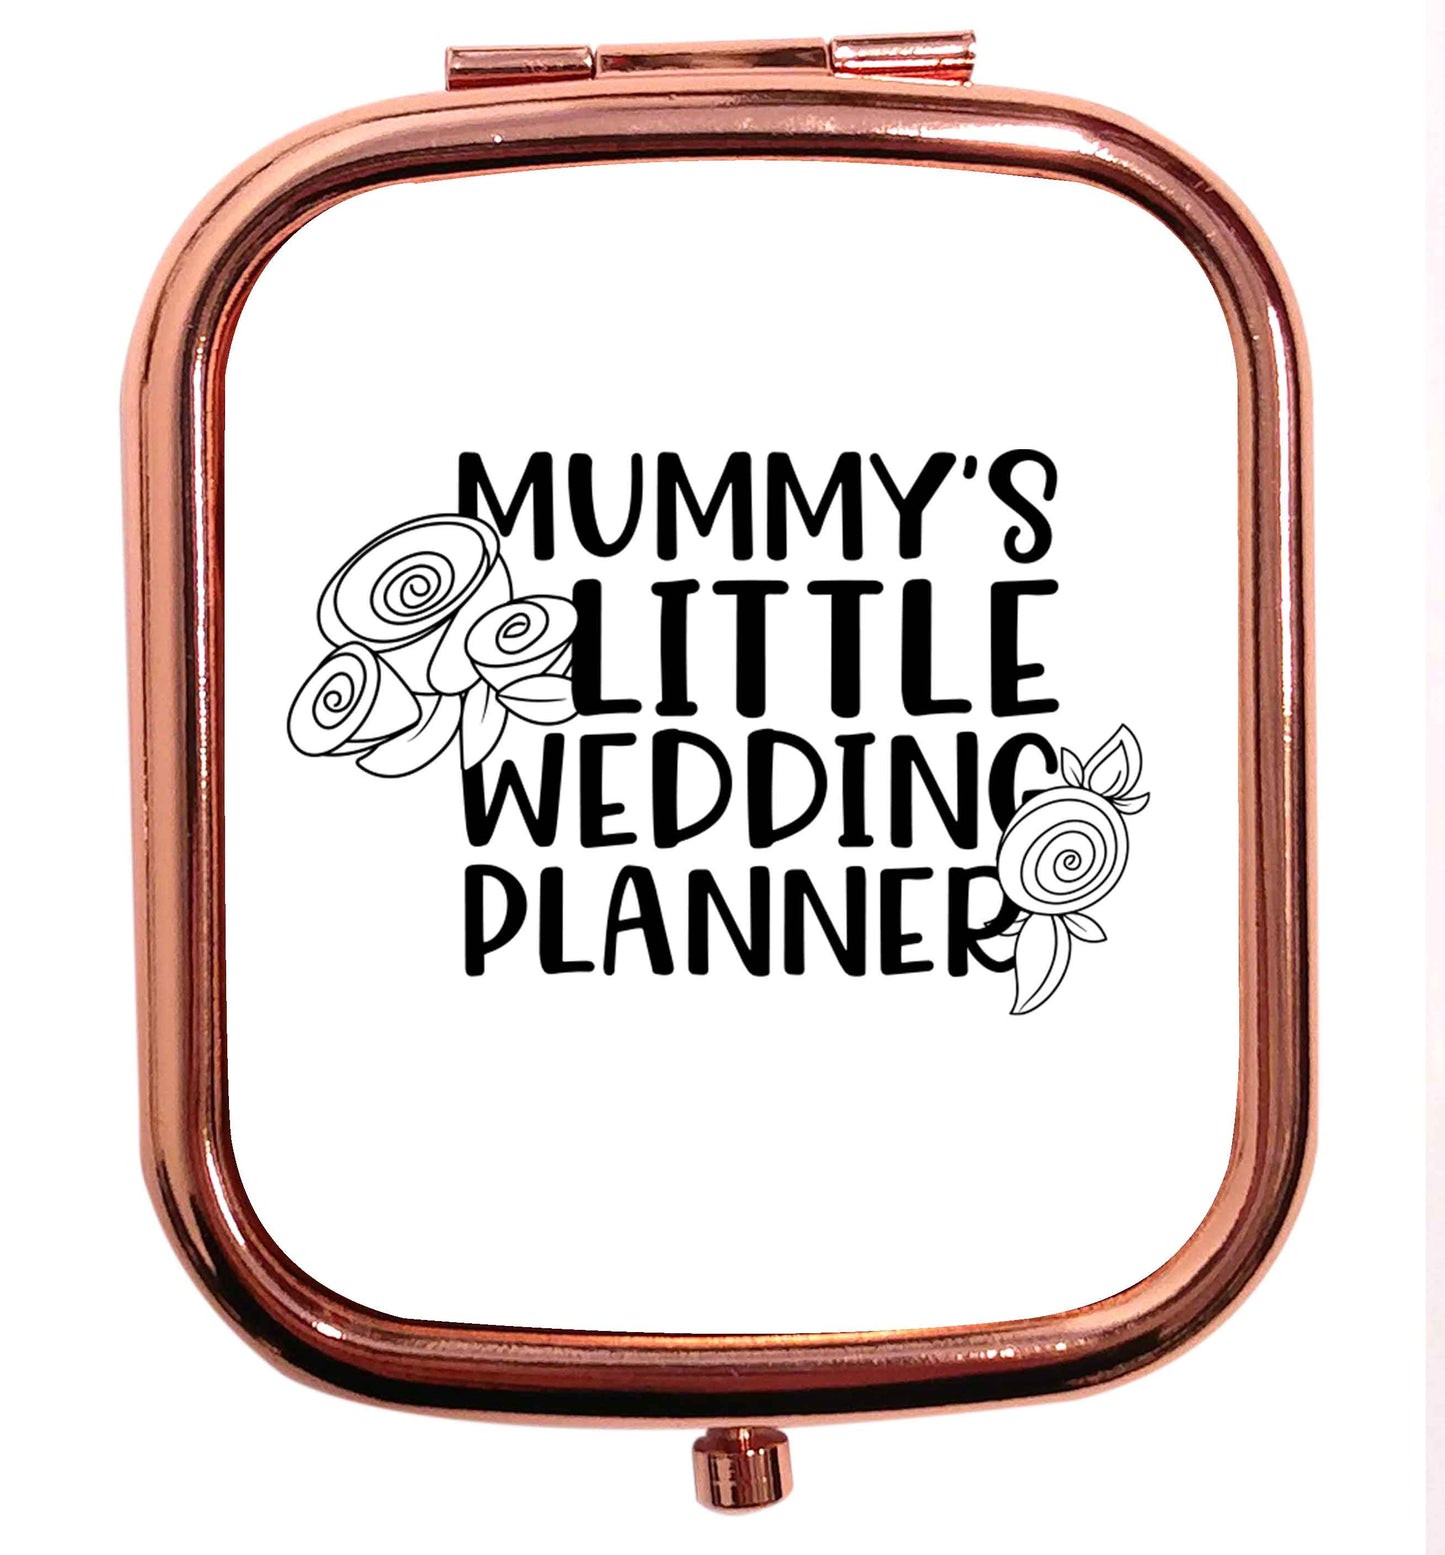 adorable wedding themed gifts for your mini wedding planner! rose gold square pocket mirror